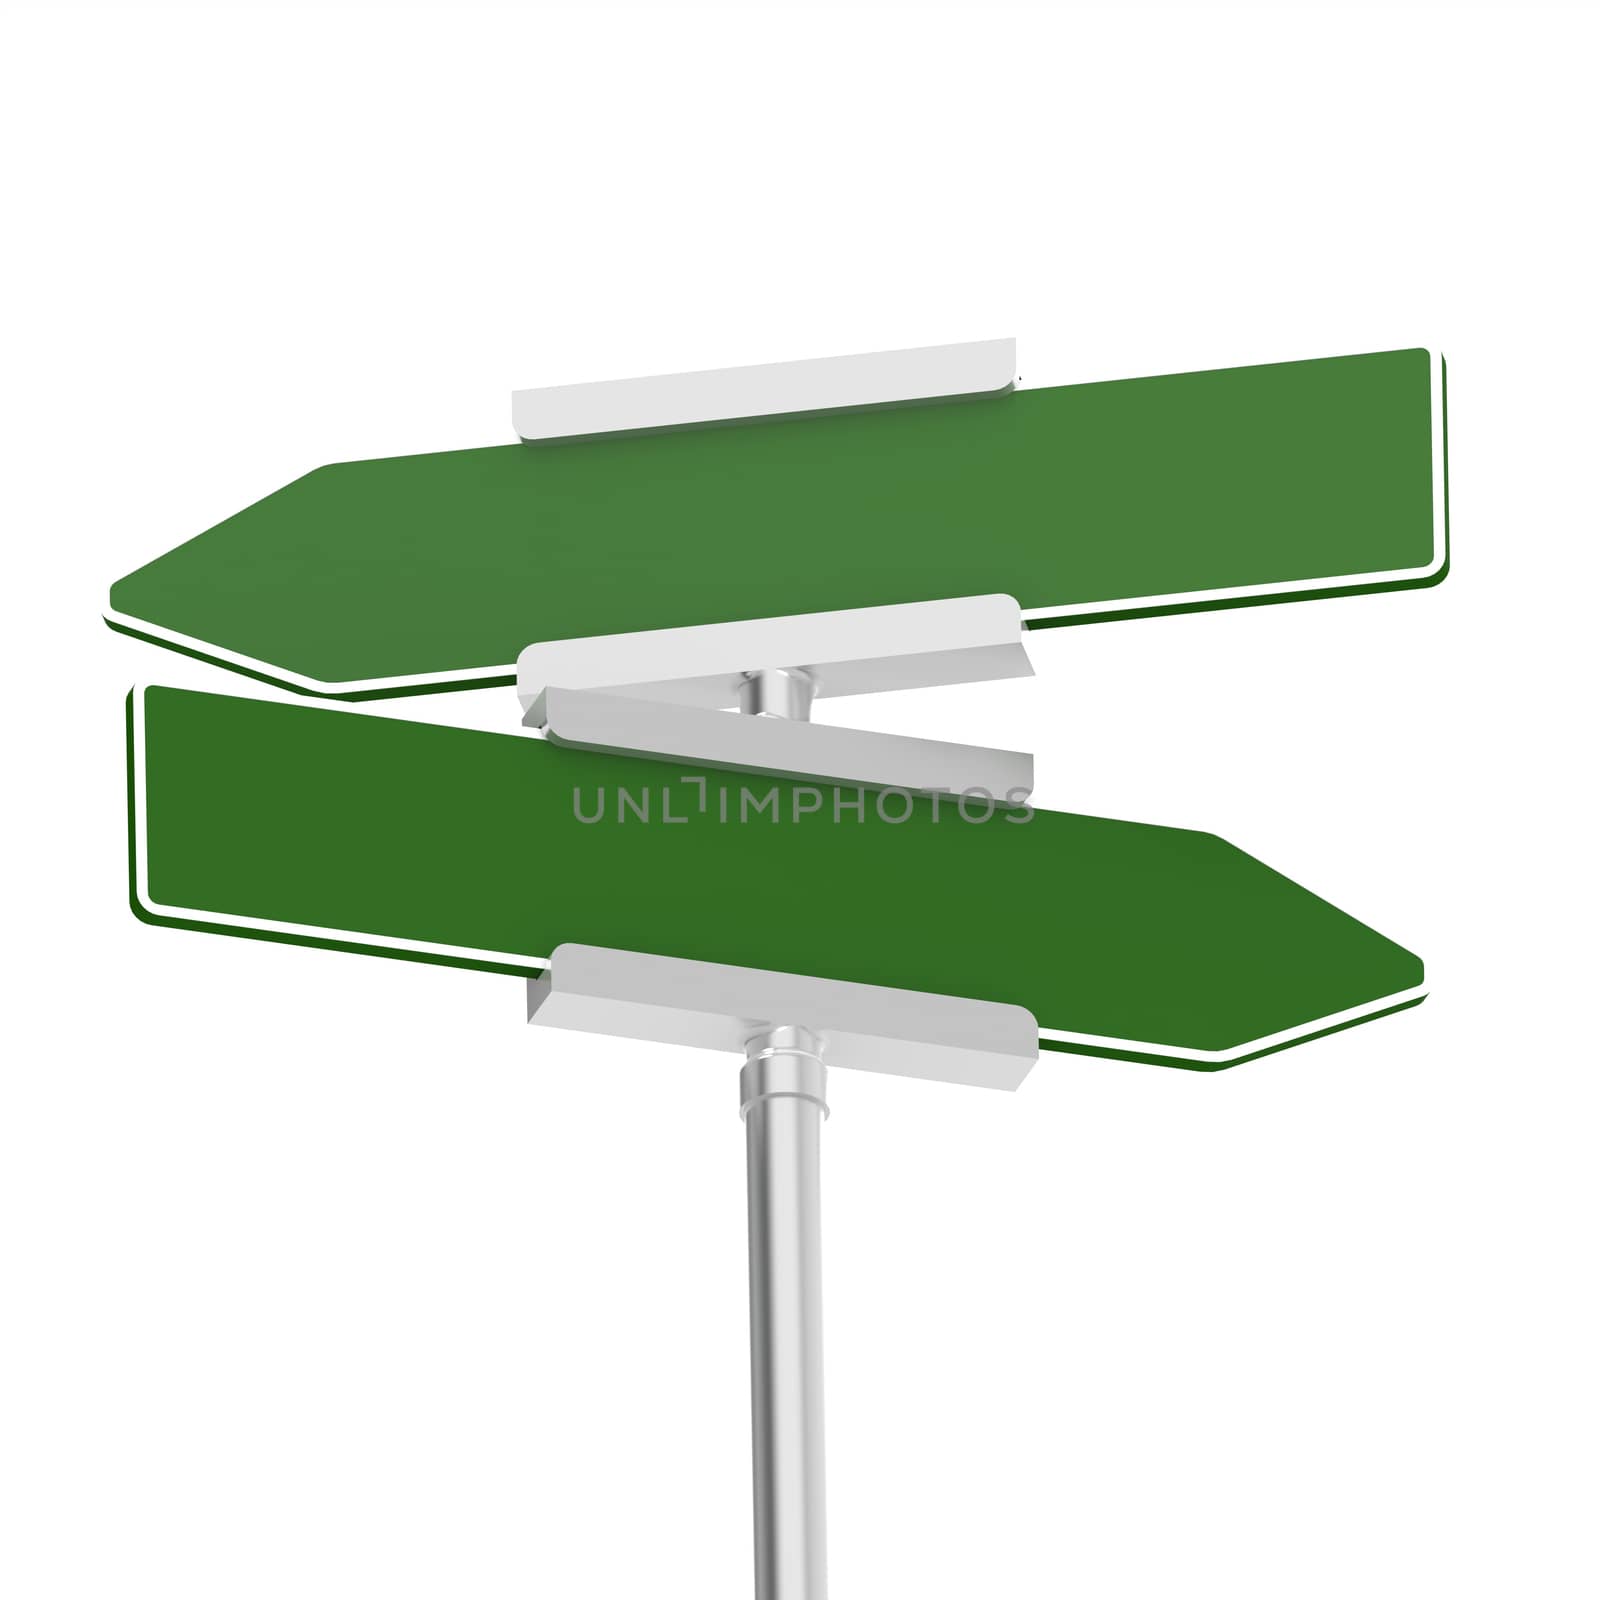 Green signboard with metal pole, isolated with white background by tang90246